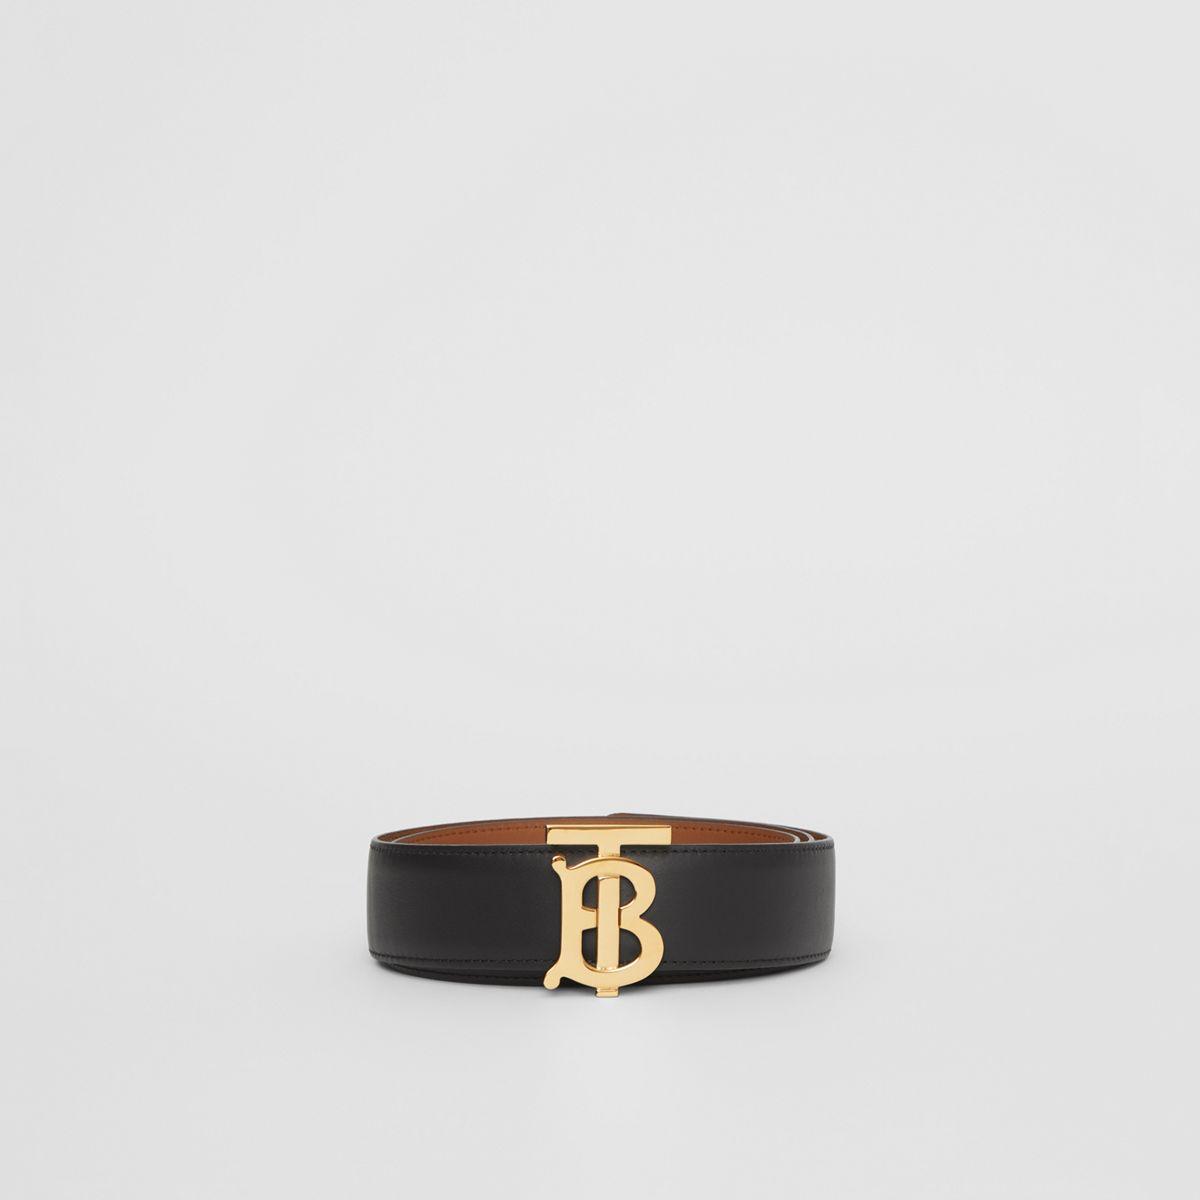 Burberry Motif Reversible Leather Belt in Tan (Brown) - Save 89% - Lyst